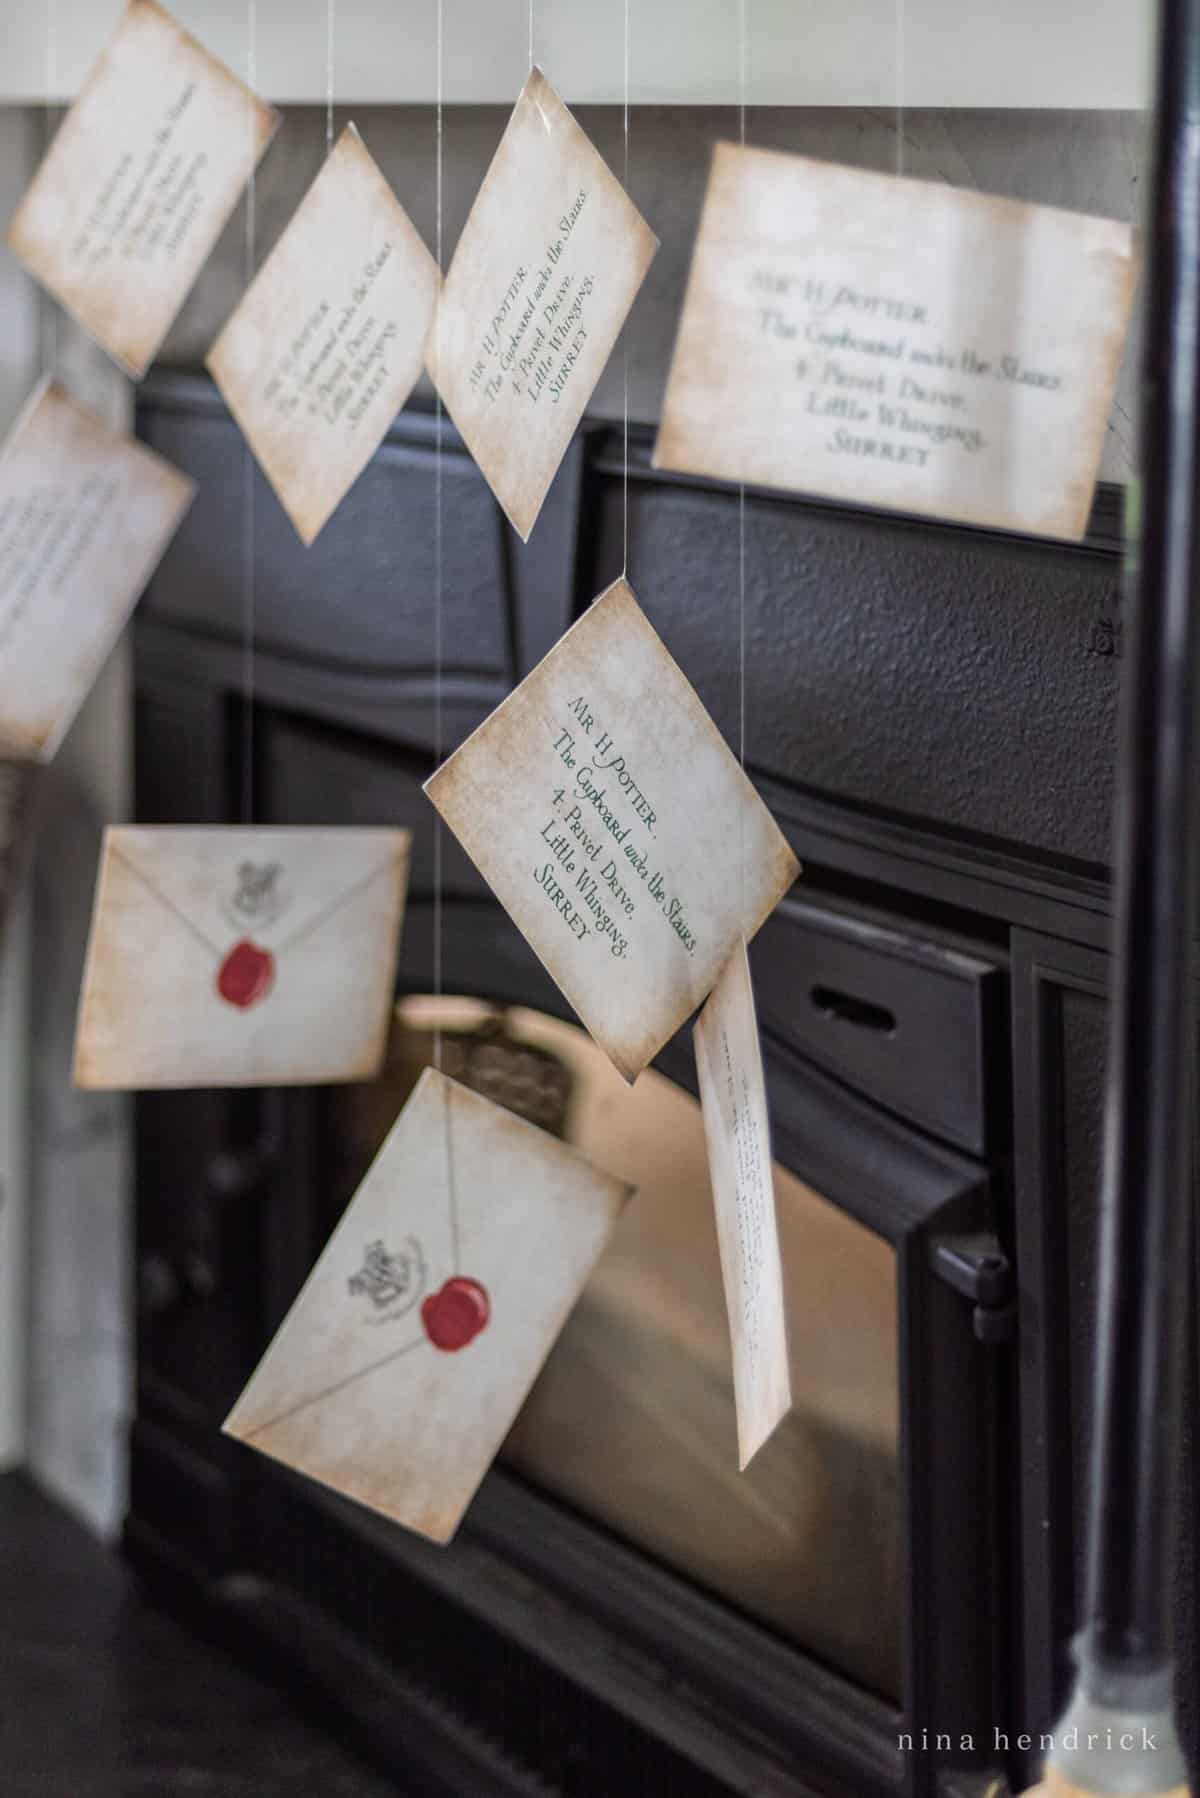 Harry Potter invitations in the form of Hogwarts acceptance letters, elegantly hanging from a fireplace.